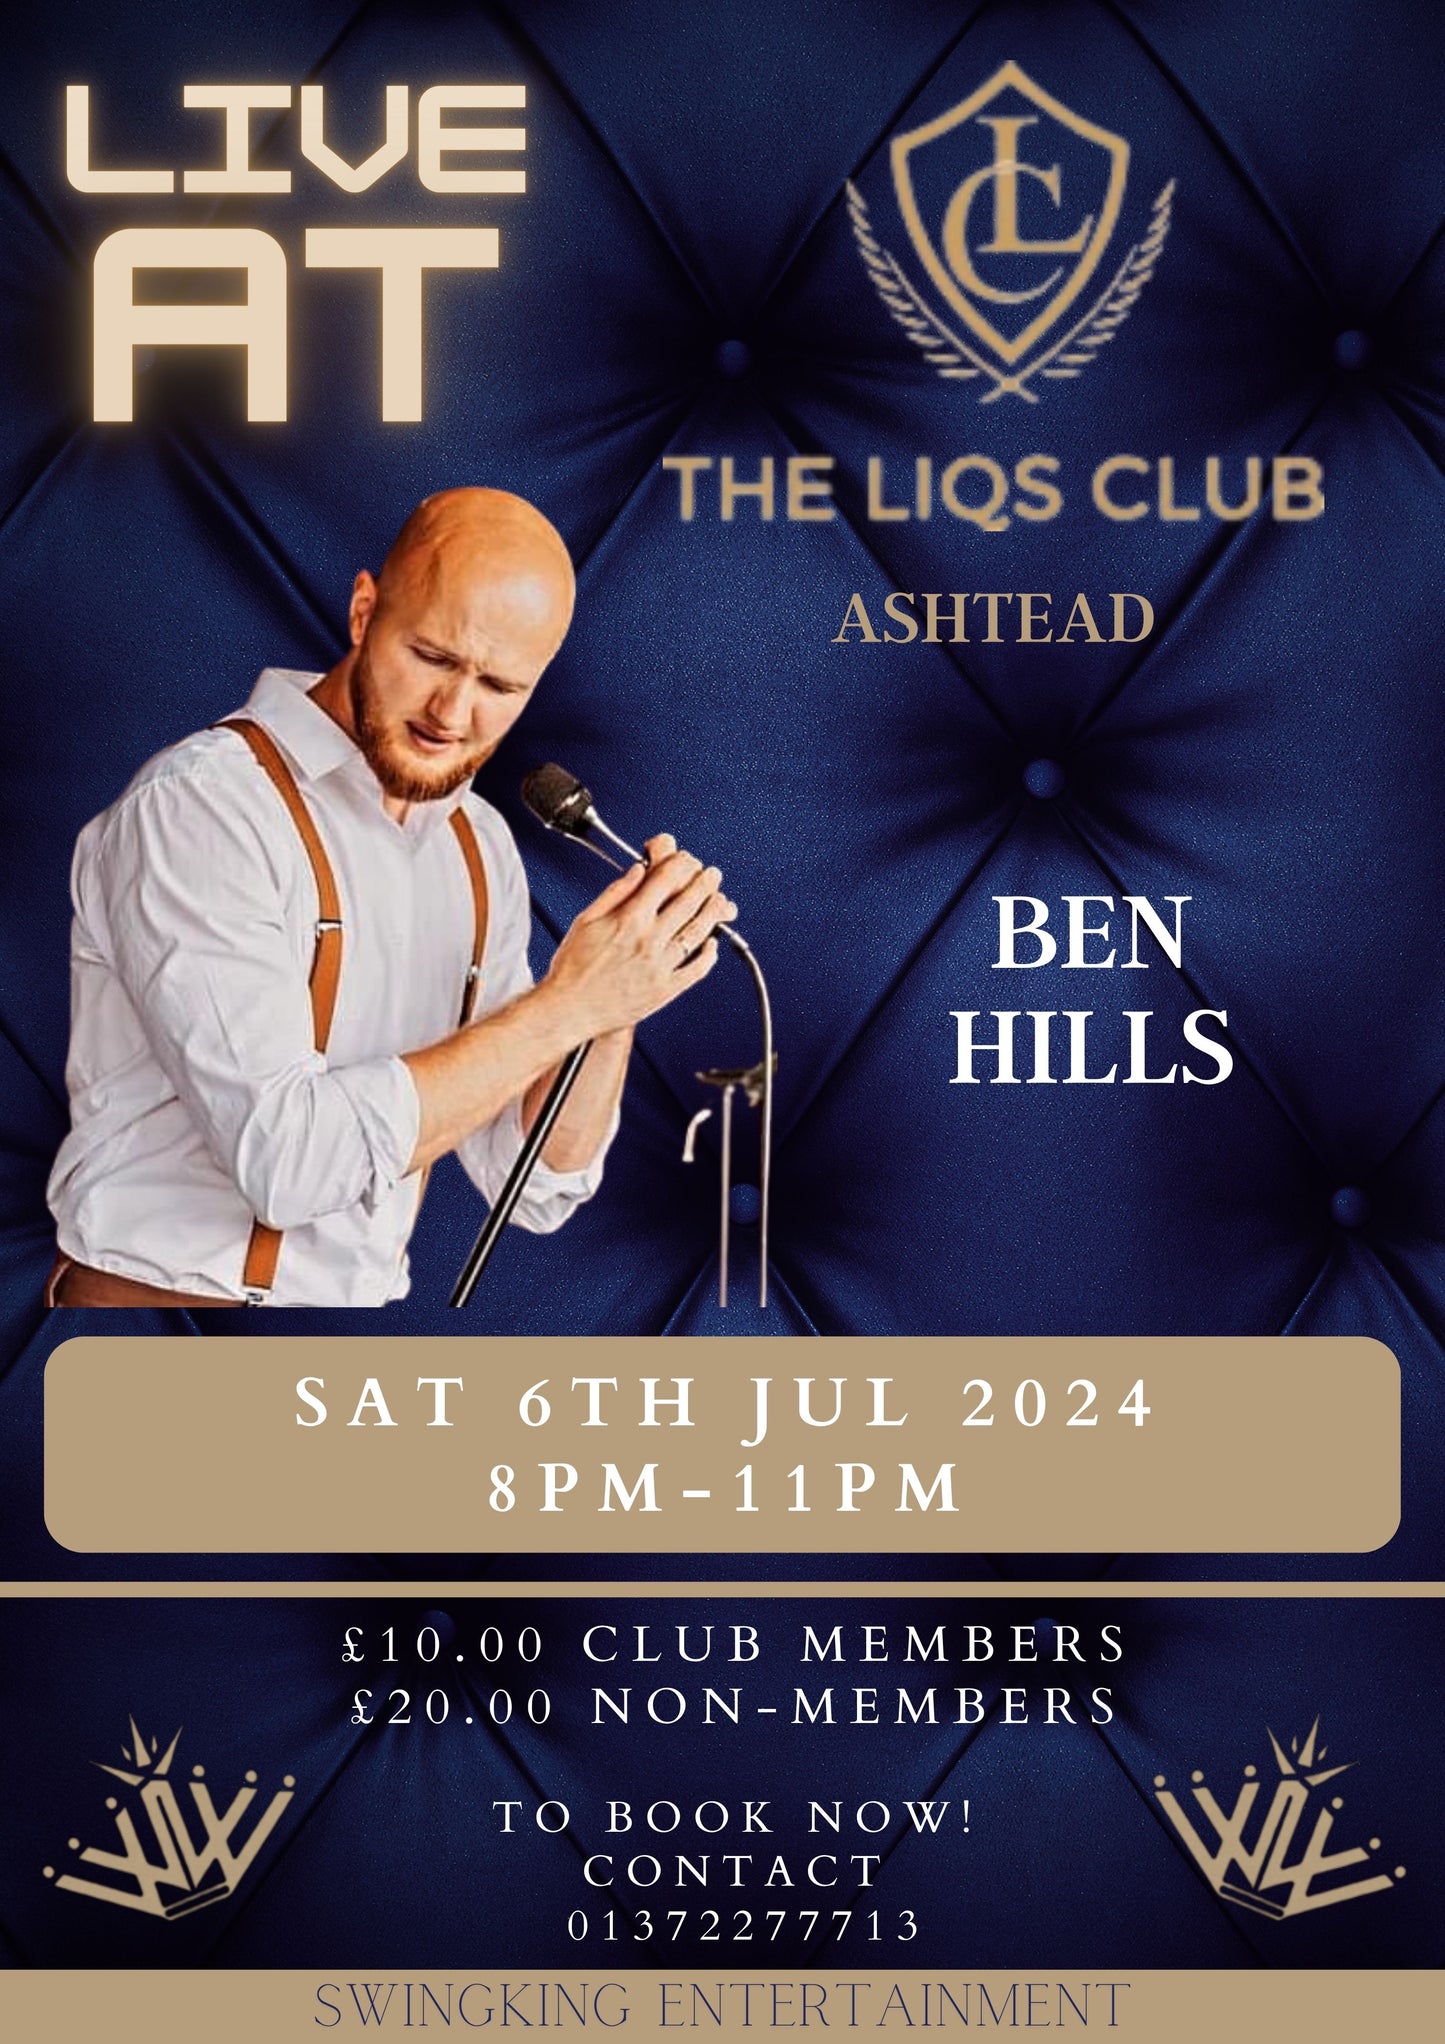 Live Music with Ben Hills - Saturday 6th July 2024